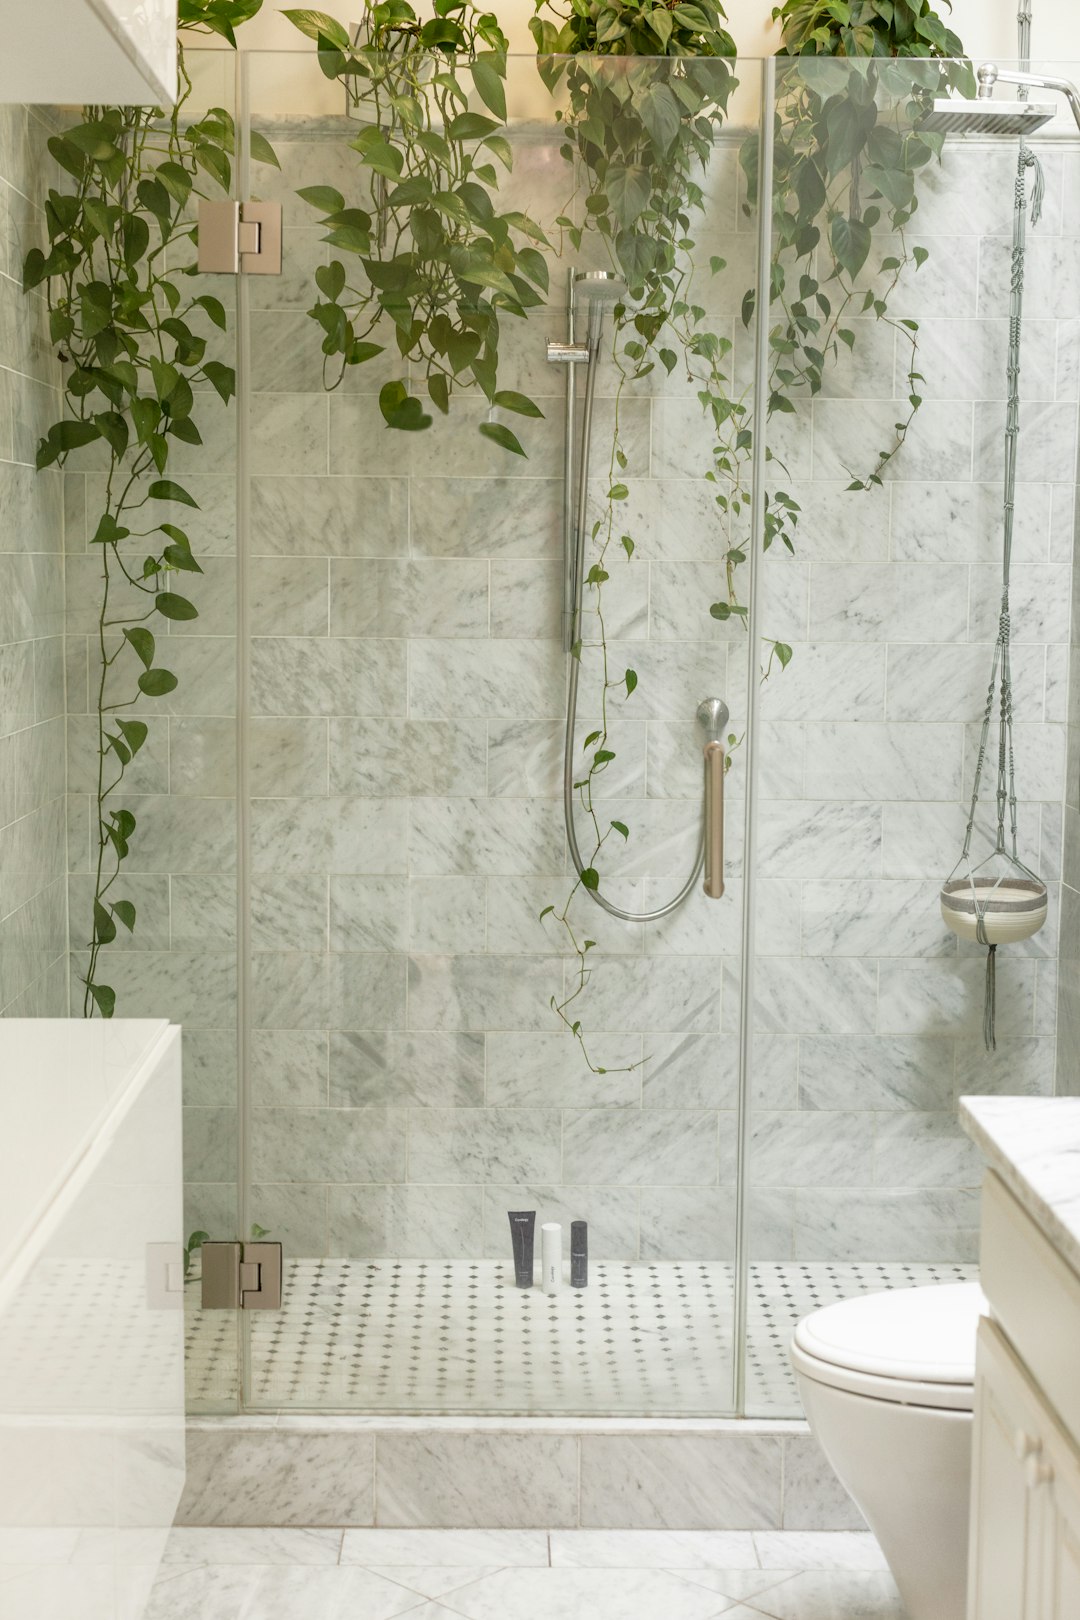 small bathroom with marble tiles, hanging plant vines, glass door to standing box finger style rain head and hand held water sprayer , neutral color scheme